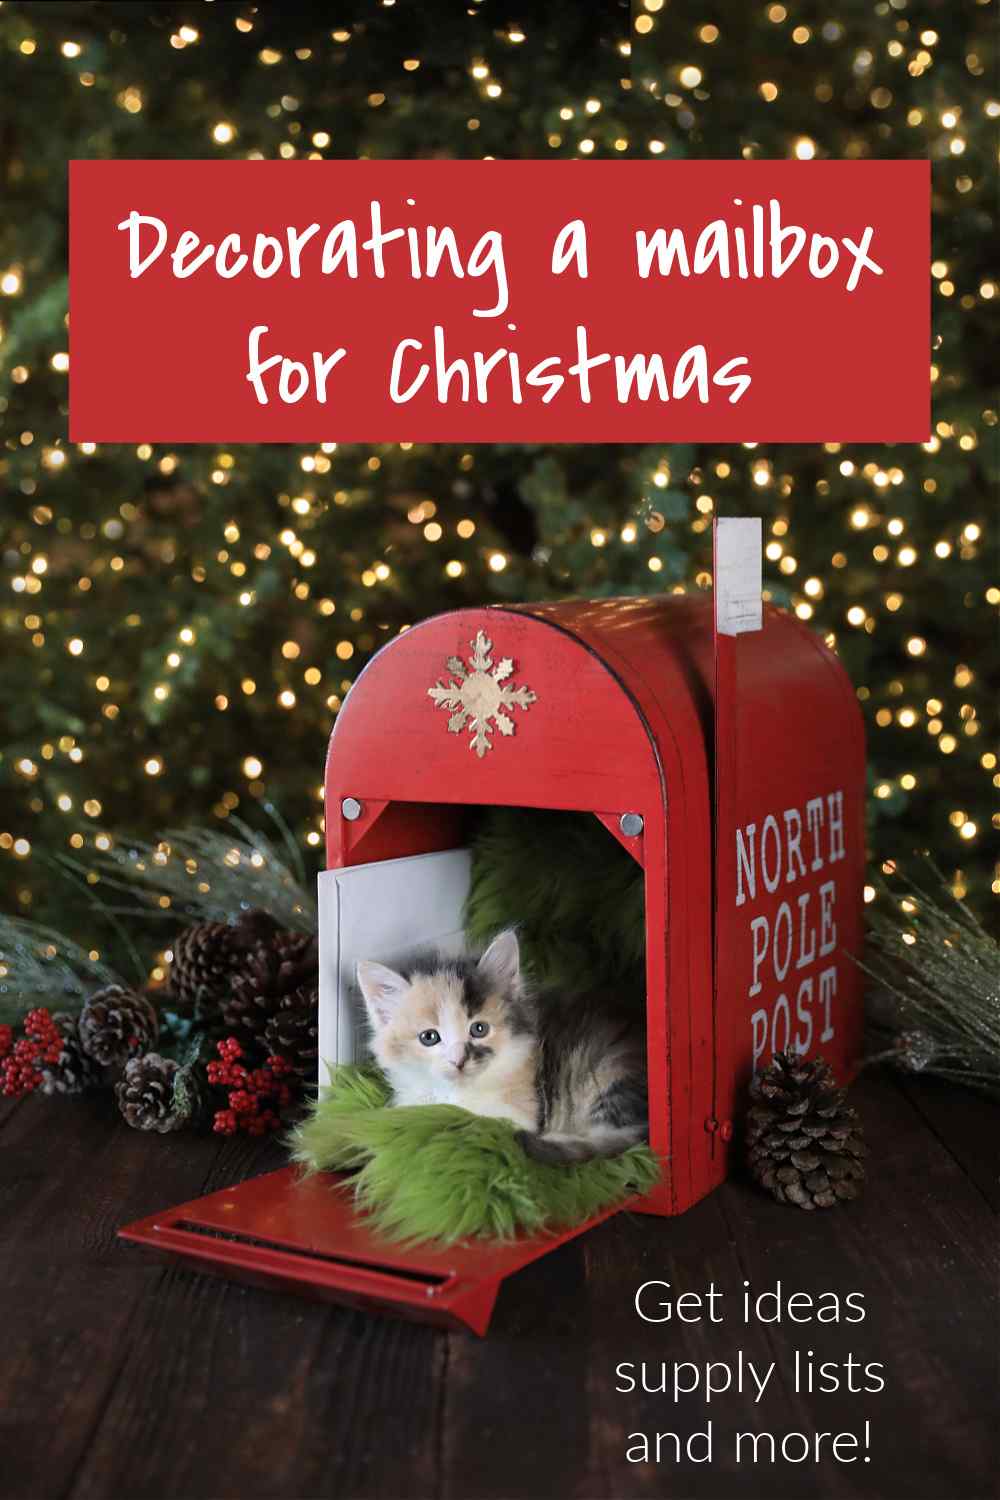 Cute kitten in a mailbox decorated for the holidays.